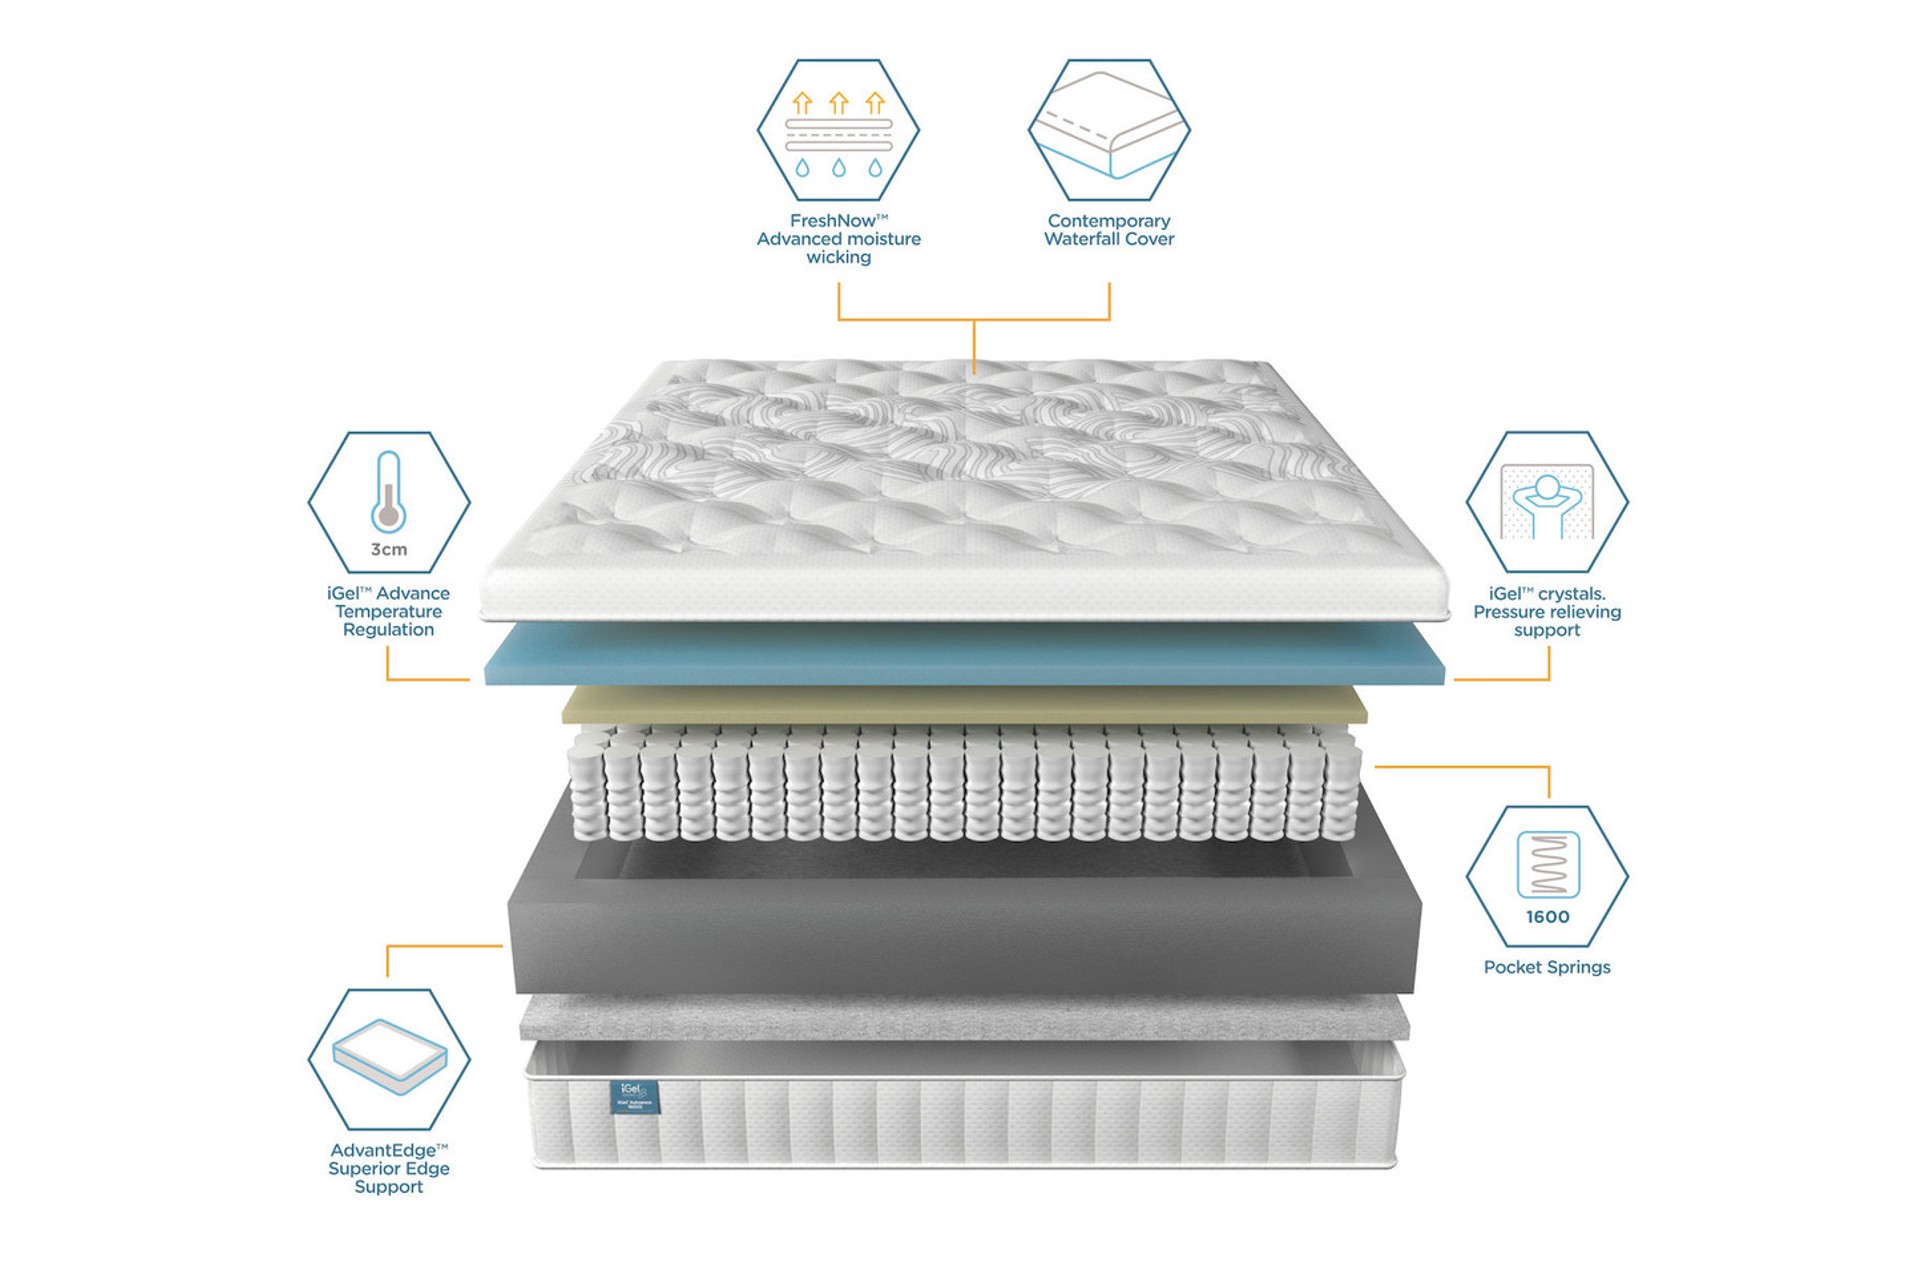 A break down of the different mattress technologies and their purpose within the iGel Advance 1600i temperature regulating mattress